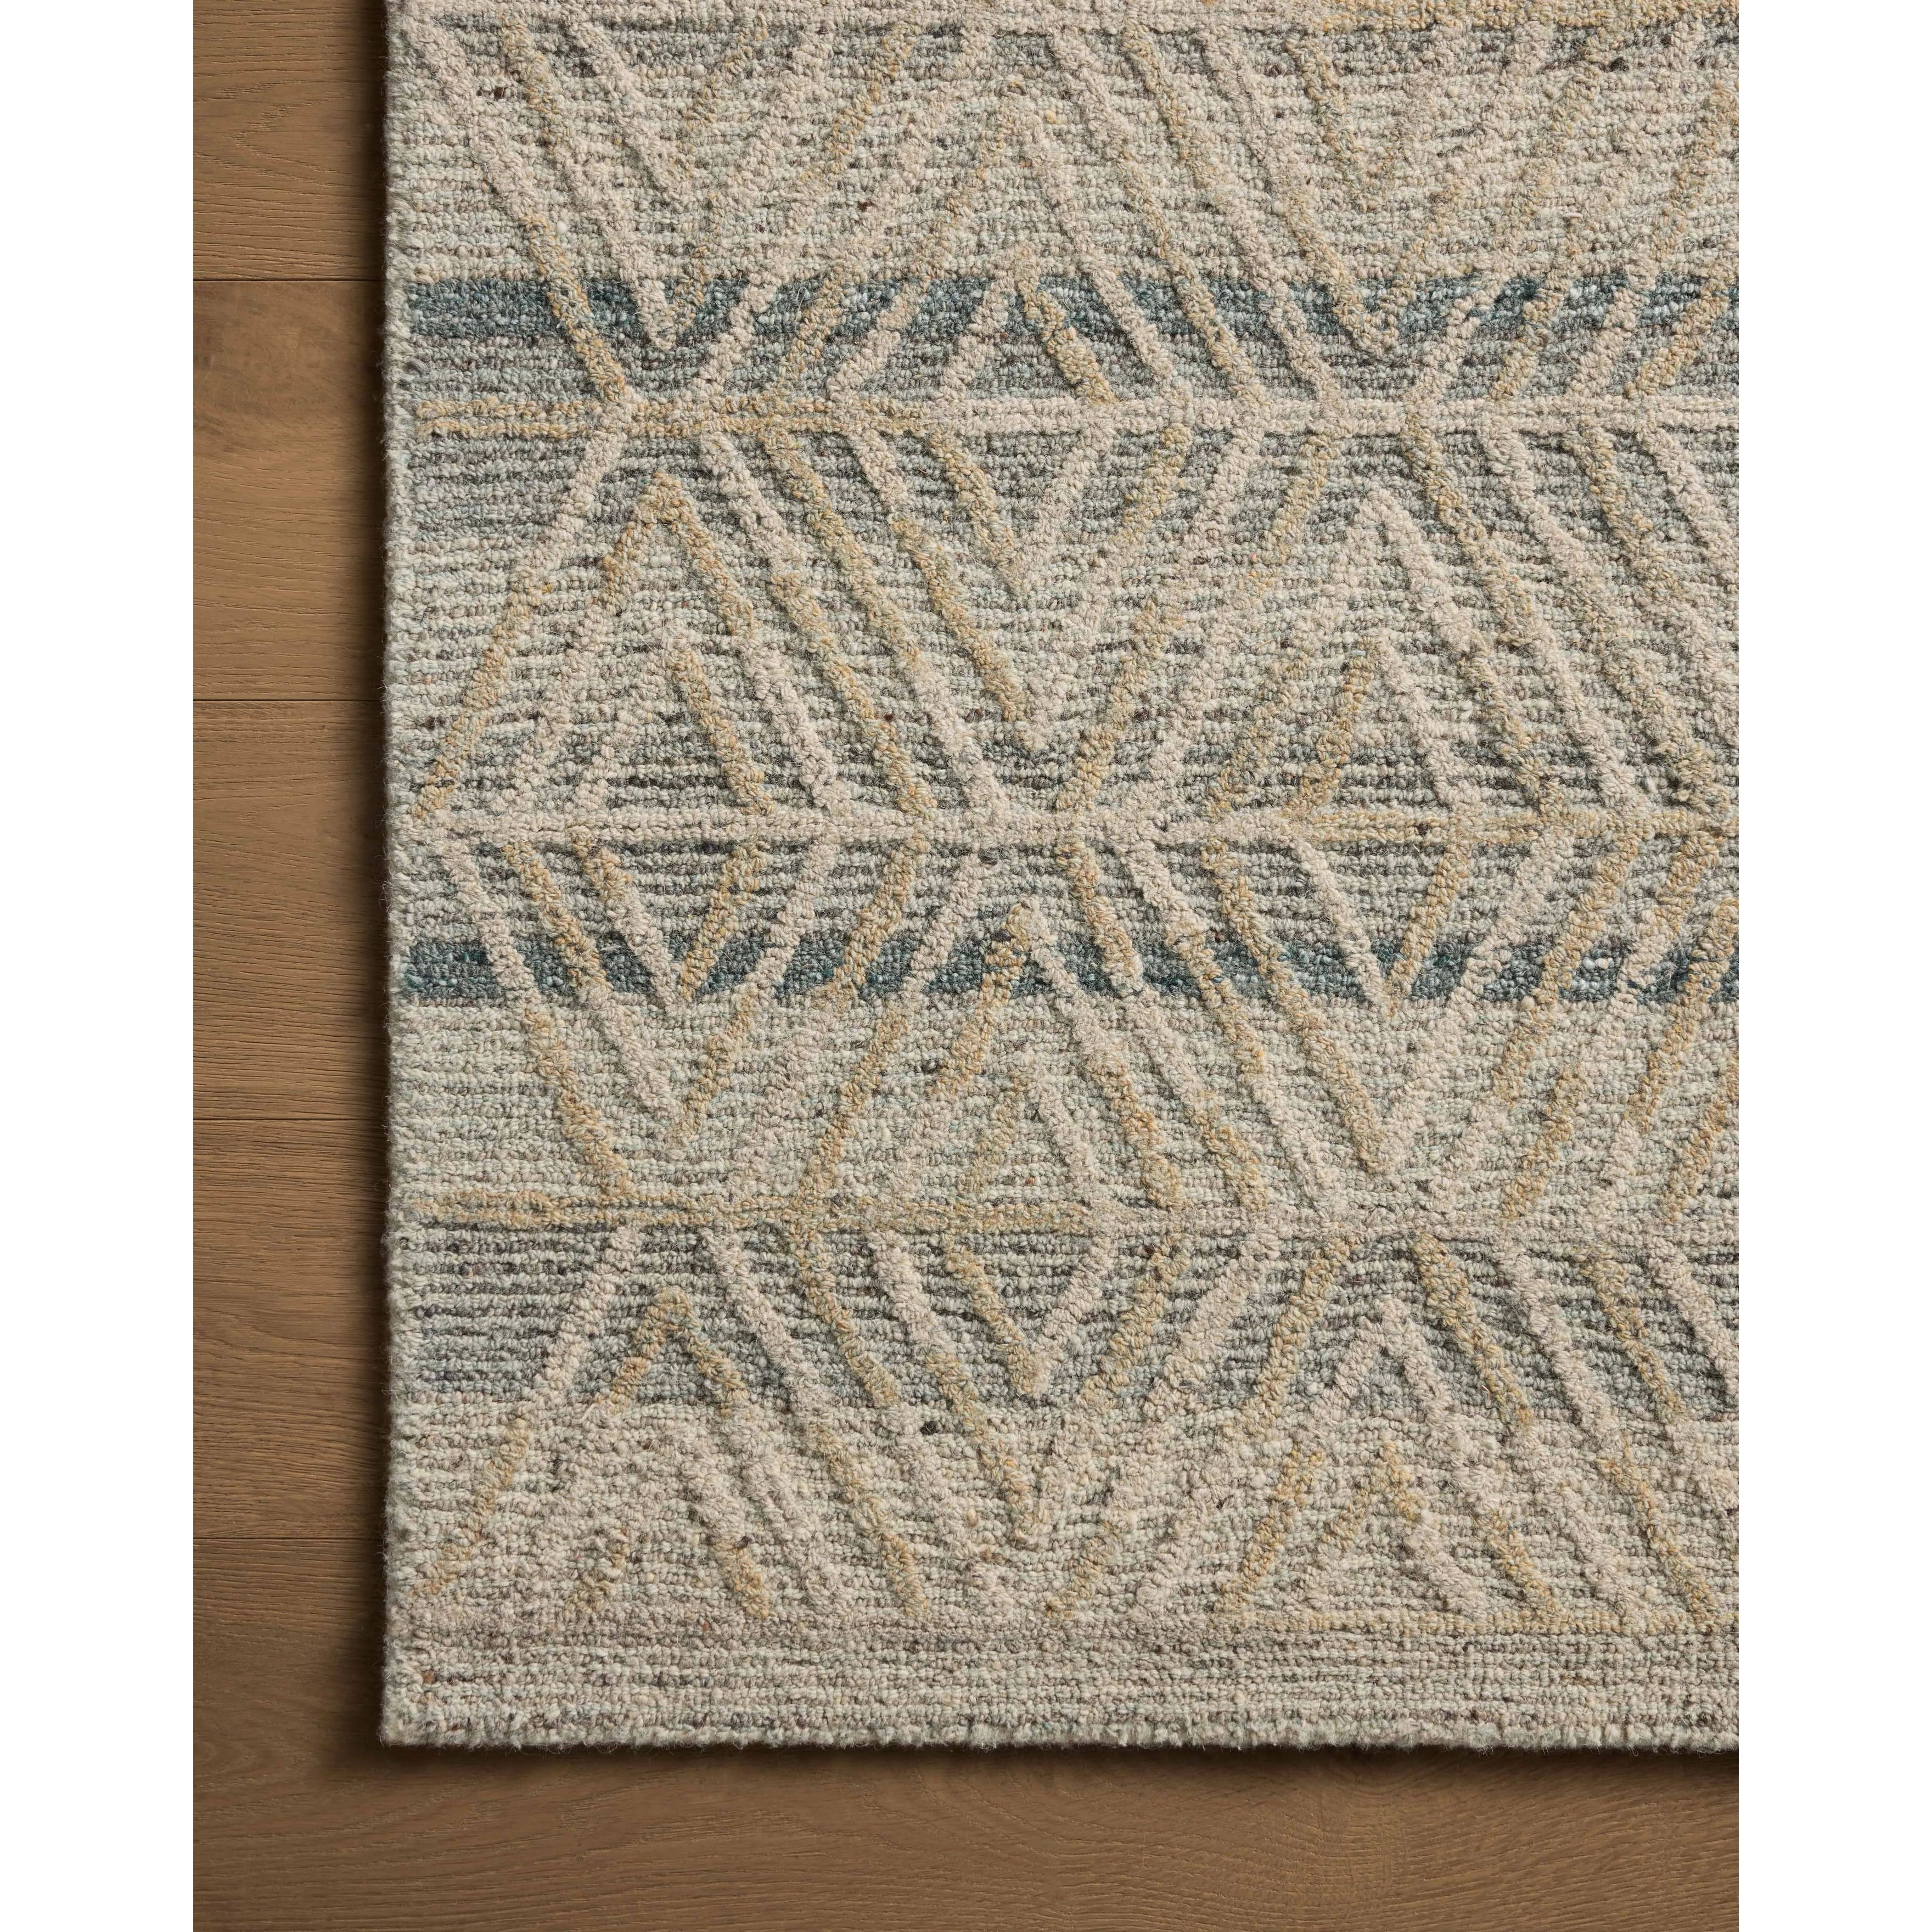 The Elias Fog / Natural Rug is a hand-tufted wool area rug with lively graphic patterns in earth and stone tones. There’s a unique texture to the rug made by over-tufting, in which a design is hand-tufted over a tufted base, creating a subtle high-low pile. Amethyst Home provides interior design, new home construction design consulting, vintage area rugs, and lighting in the Charlotte metro area.